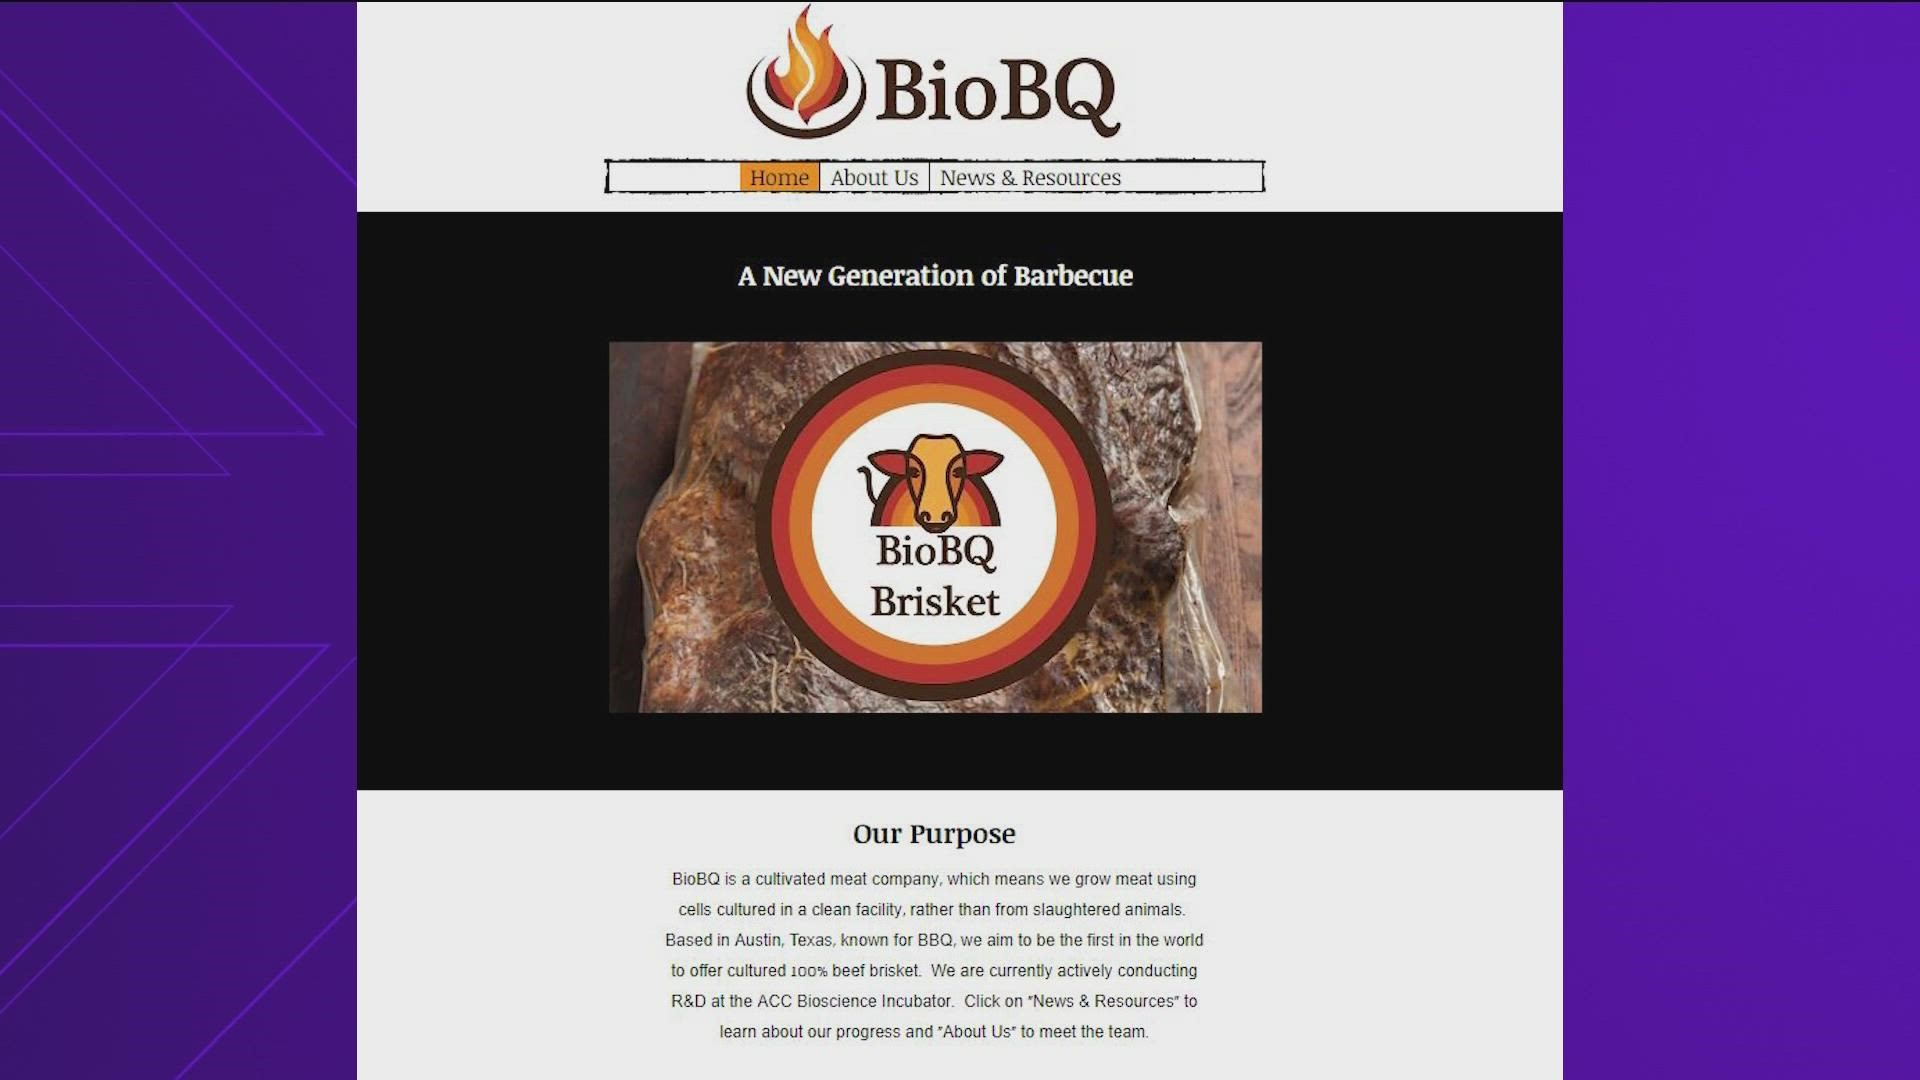 BioBQ has been working to bring its brisket to the market, which is made from cultured cells instead of slaughtered animals.